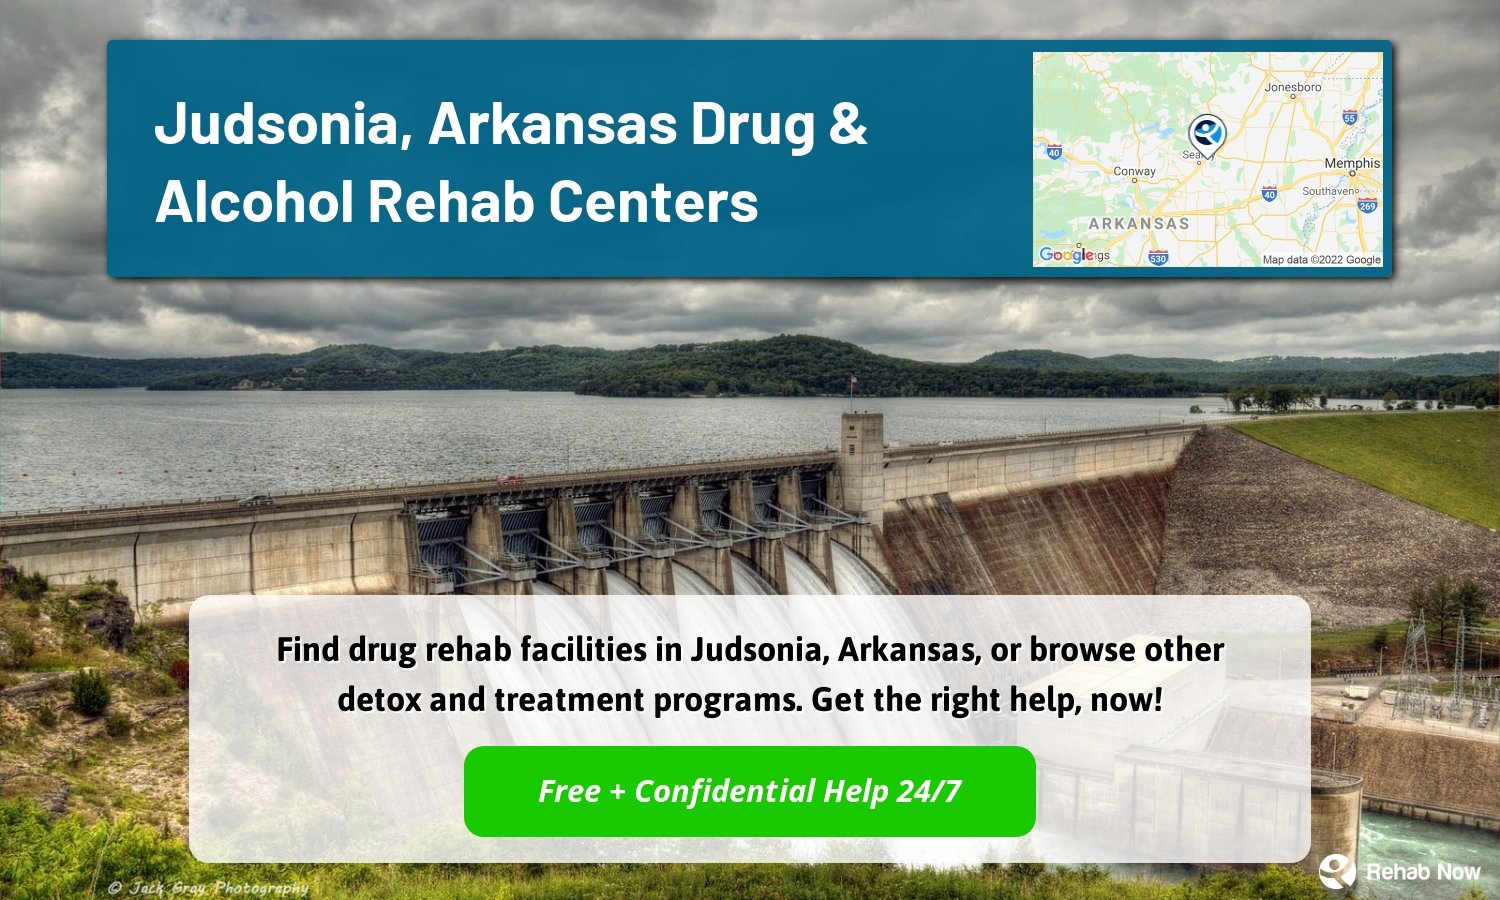 Find drug rehab facilities in Judsonia, Arkansas, or browse other detox and treatment programs. Get the right help, now!